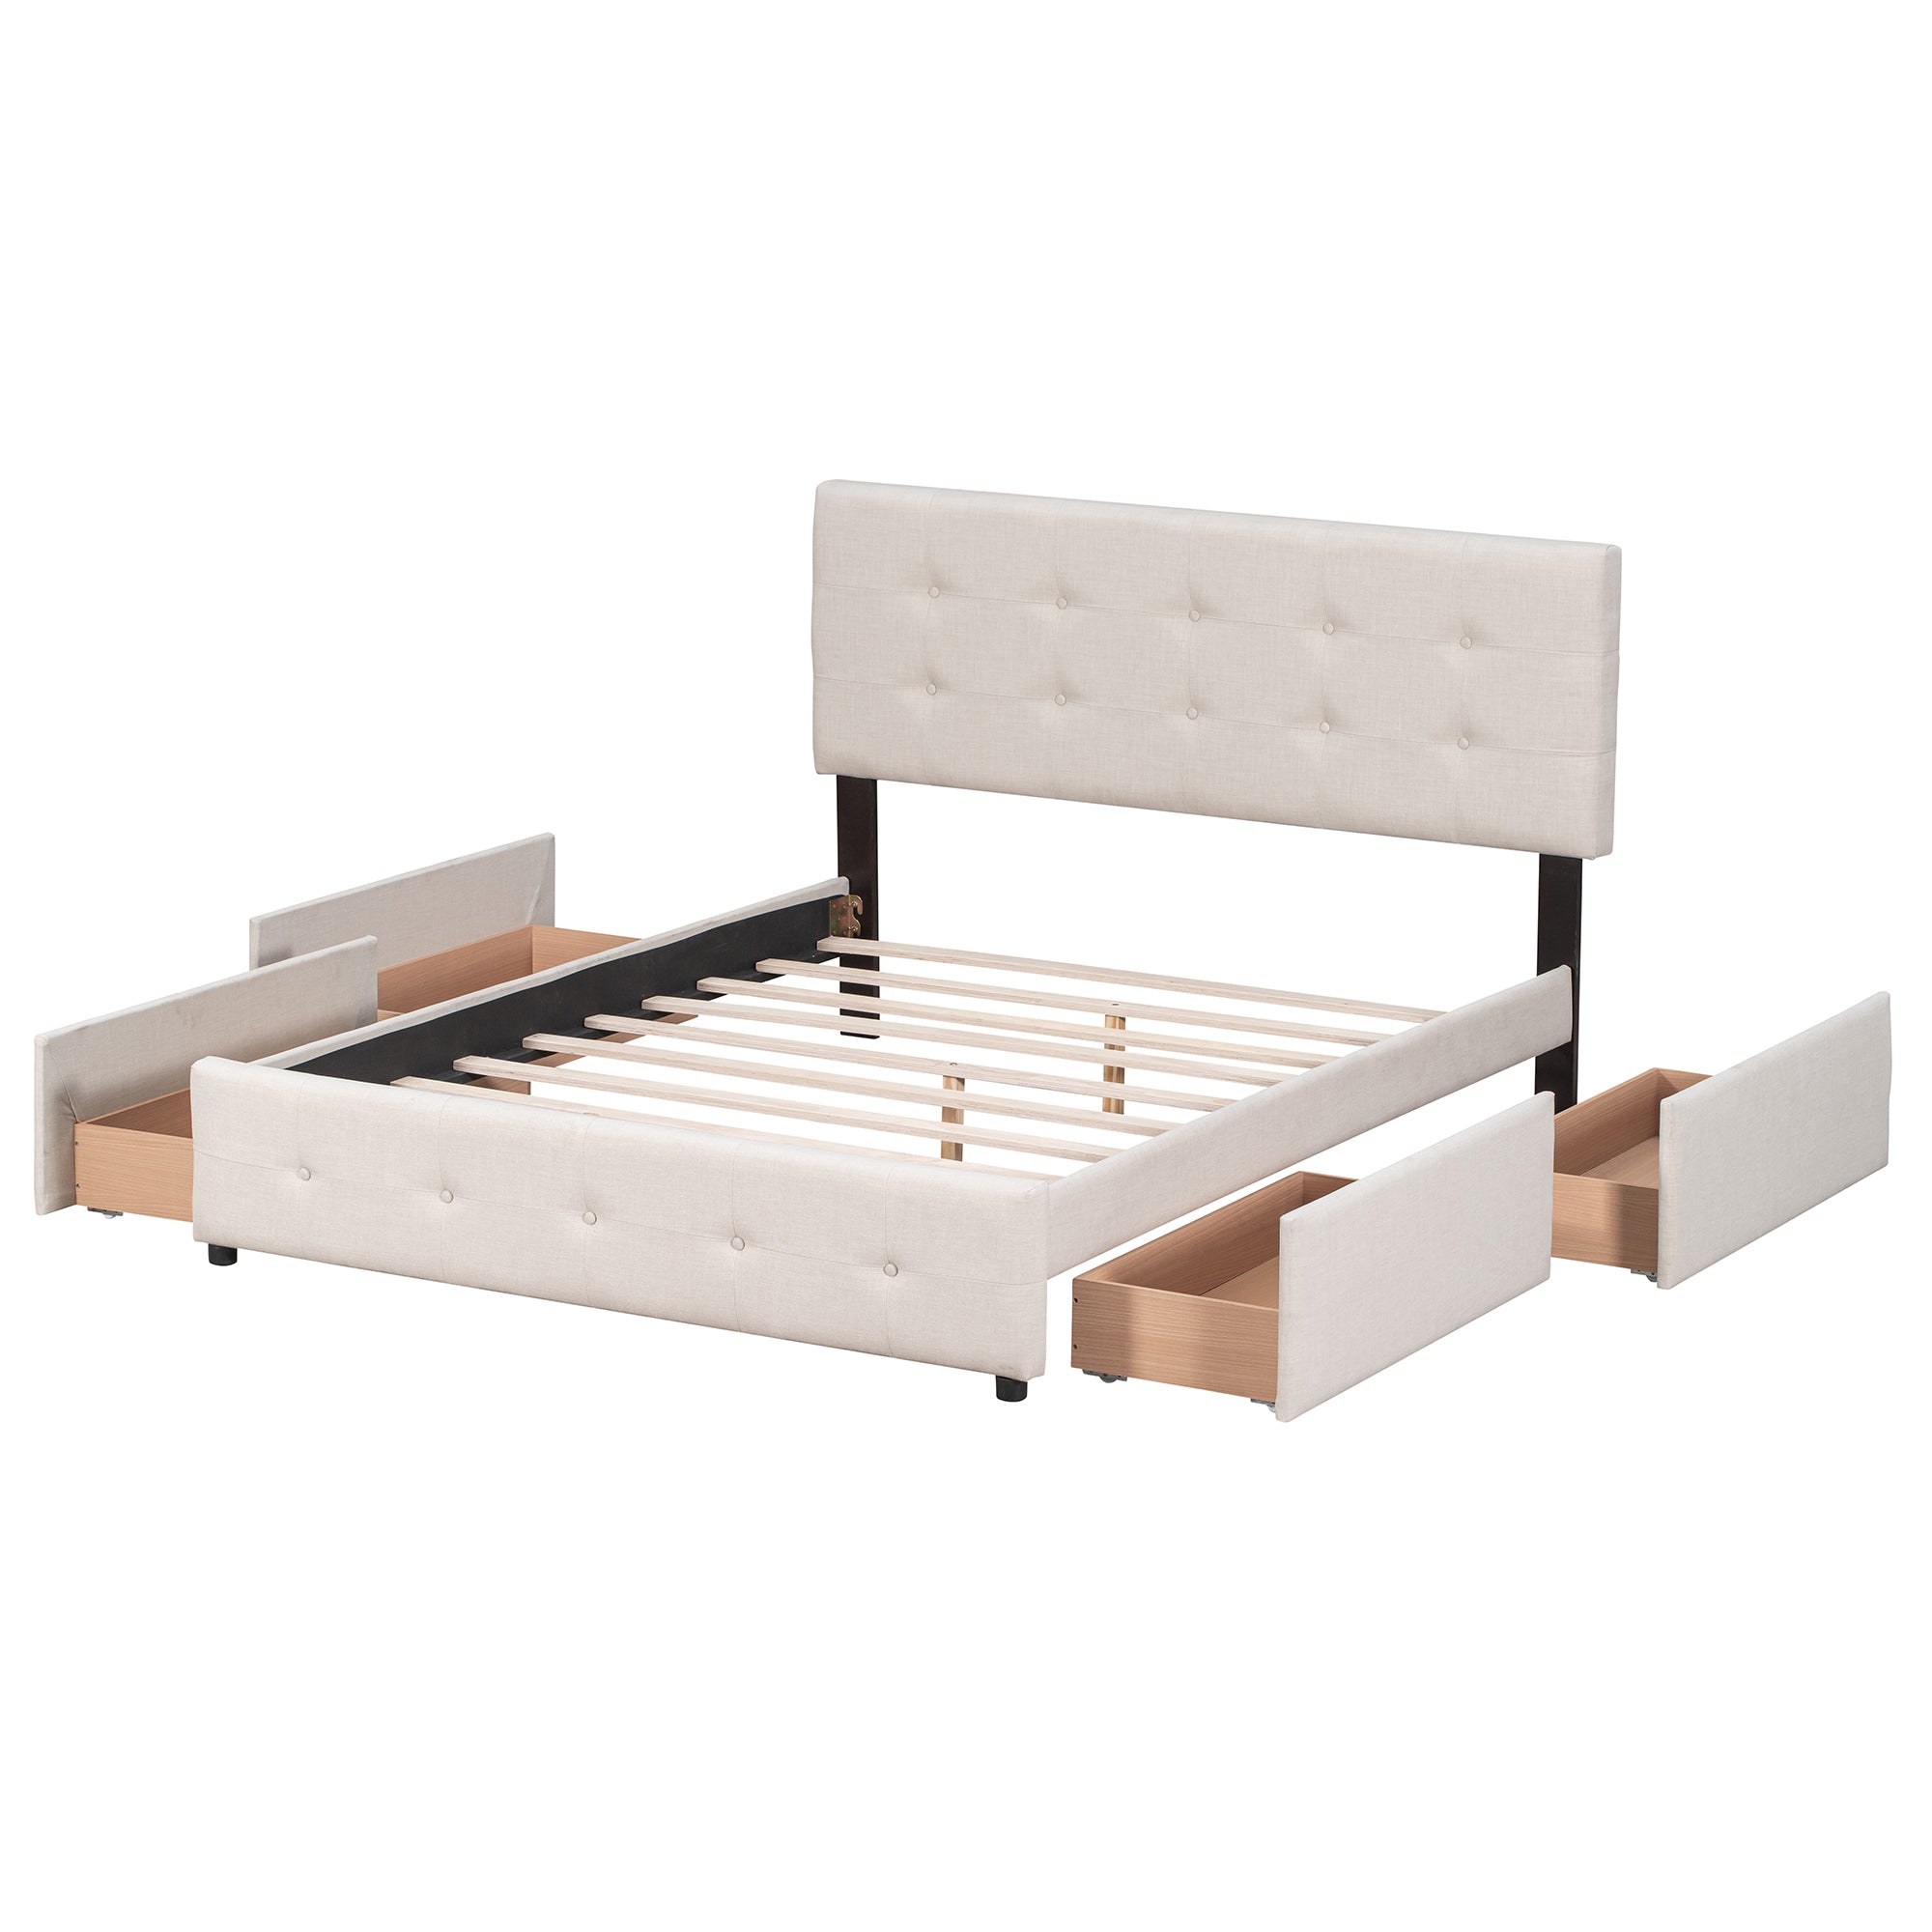 Upholstered Platform Queen Size Bed with Headboard and Drawers By: Alabama Beds